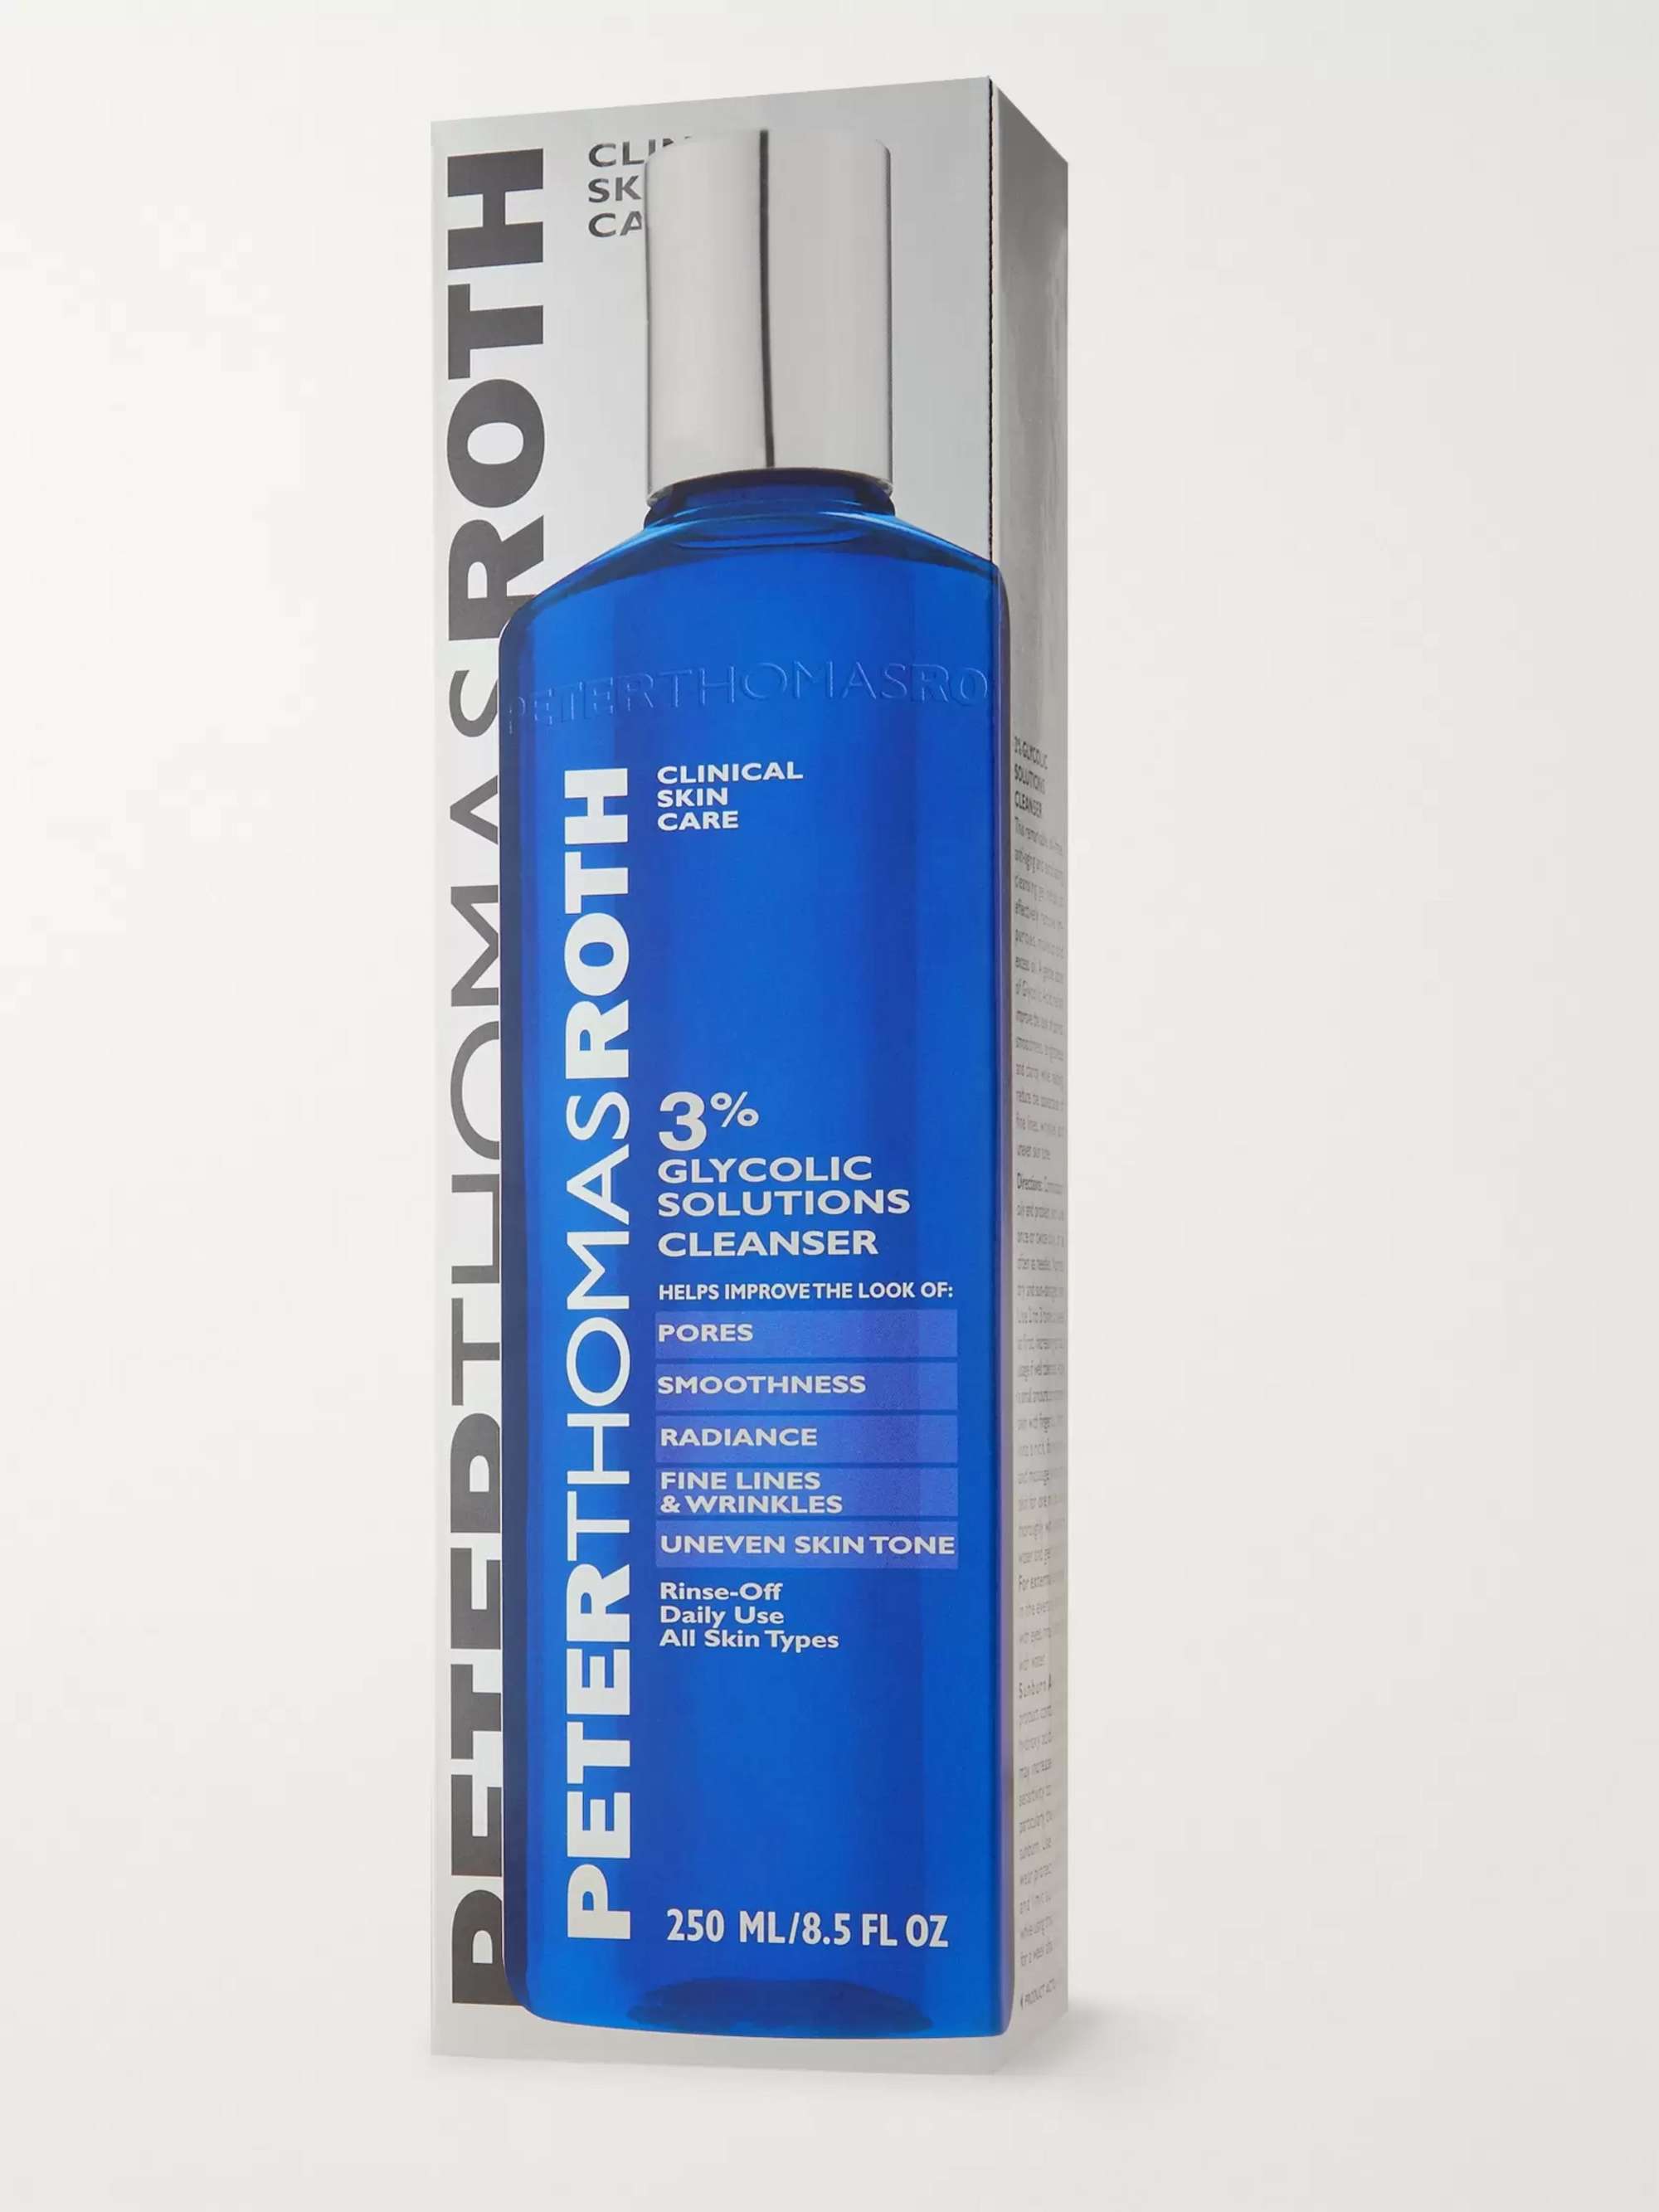 PETER THOMAS ROTH 3% Glycolic Solutions Cleanser, 250ml